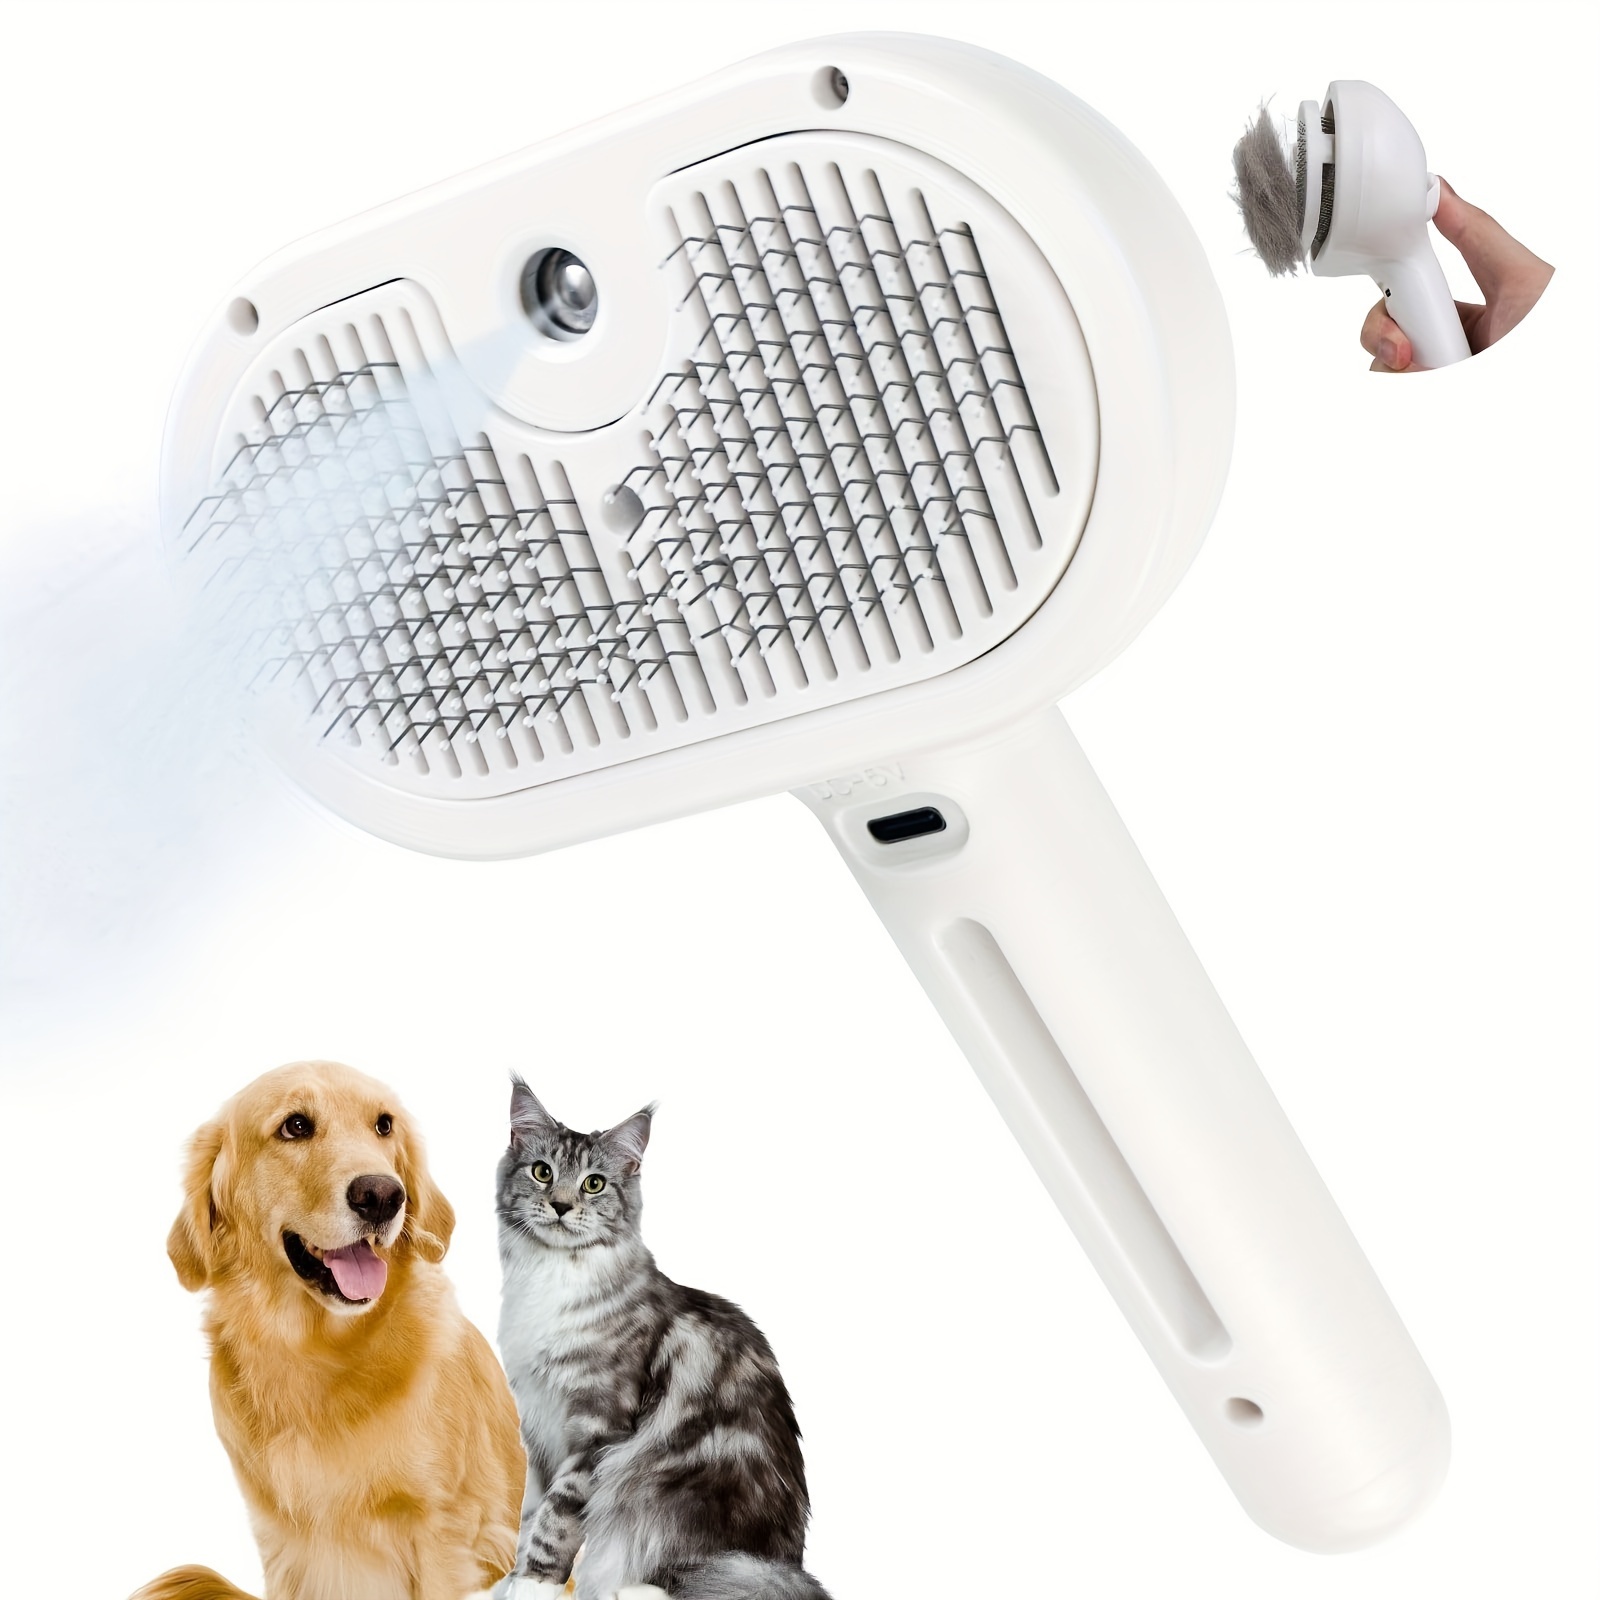 

Spray Cat Brush For Shedding Cat Hair Brush For Removing Flying Hair And Static, Cleaning Supplies